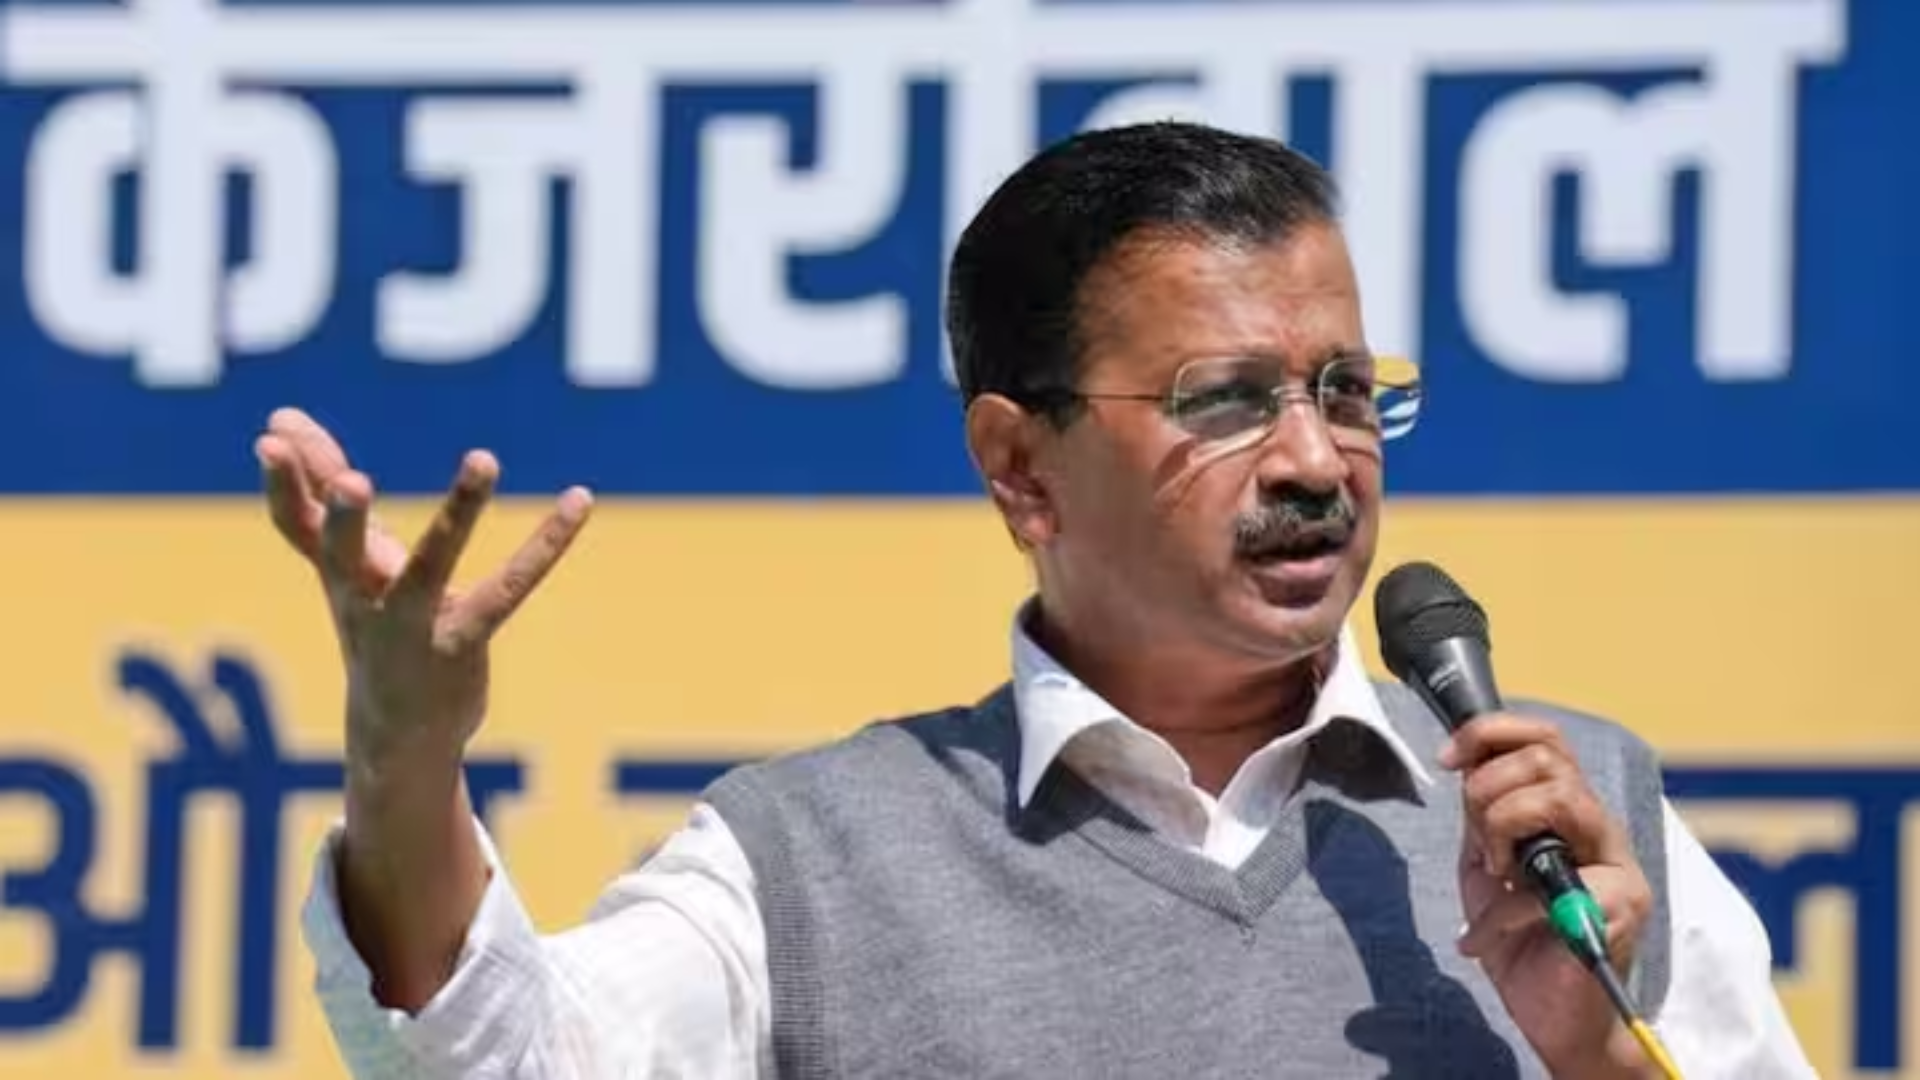 Kejriwal Warns Against BJP’s Inclusion of People from Pakistan and Bangladesh, Calls CAA a Risky Step